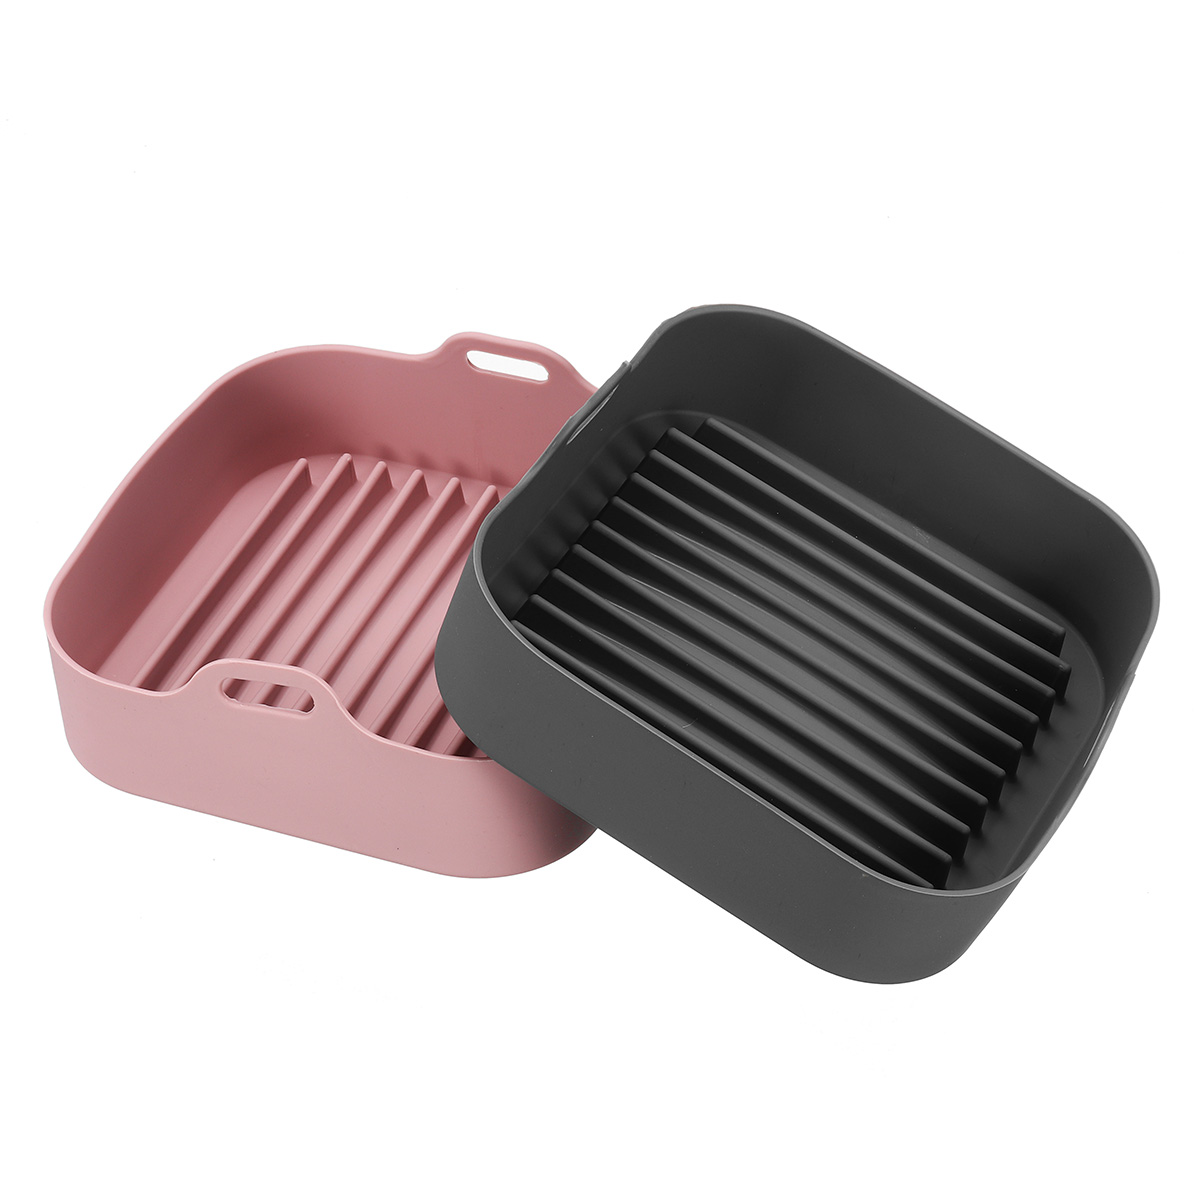 Multifunctional-Silicone-Baking-Tray-High-Temperature-Resistant-Non-stick-Bread-Fried-Baking-Pan-wit-1864776-13